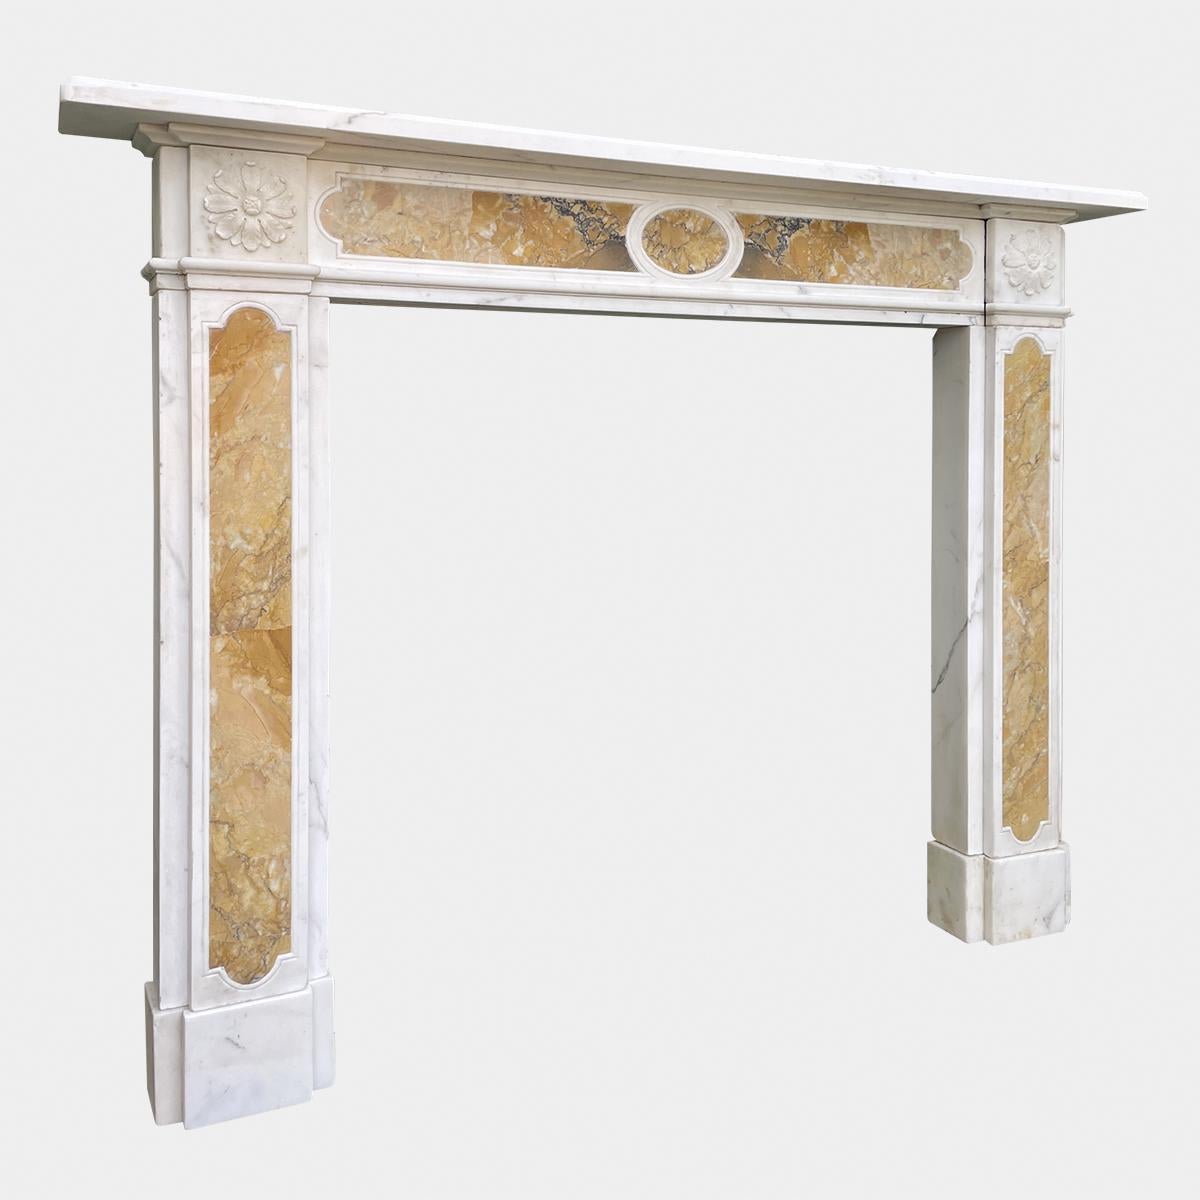 Antique Regency Style Statuary and Siena Marble Fireplace Mantel In Good Condition For Sale In London, GB